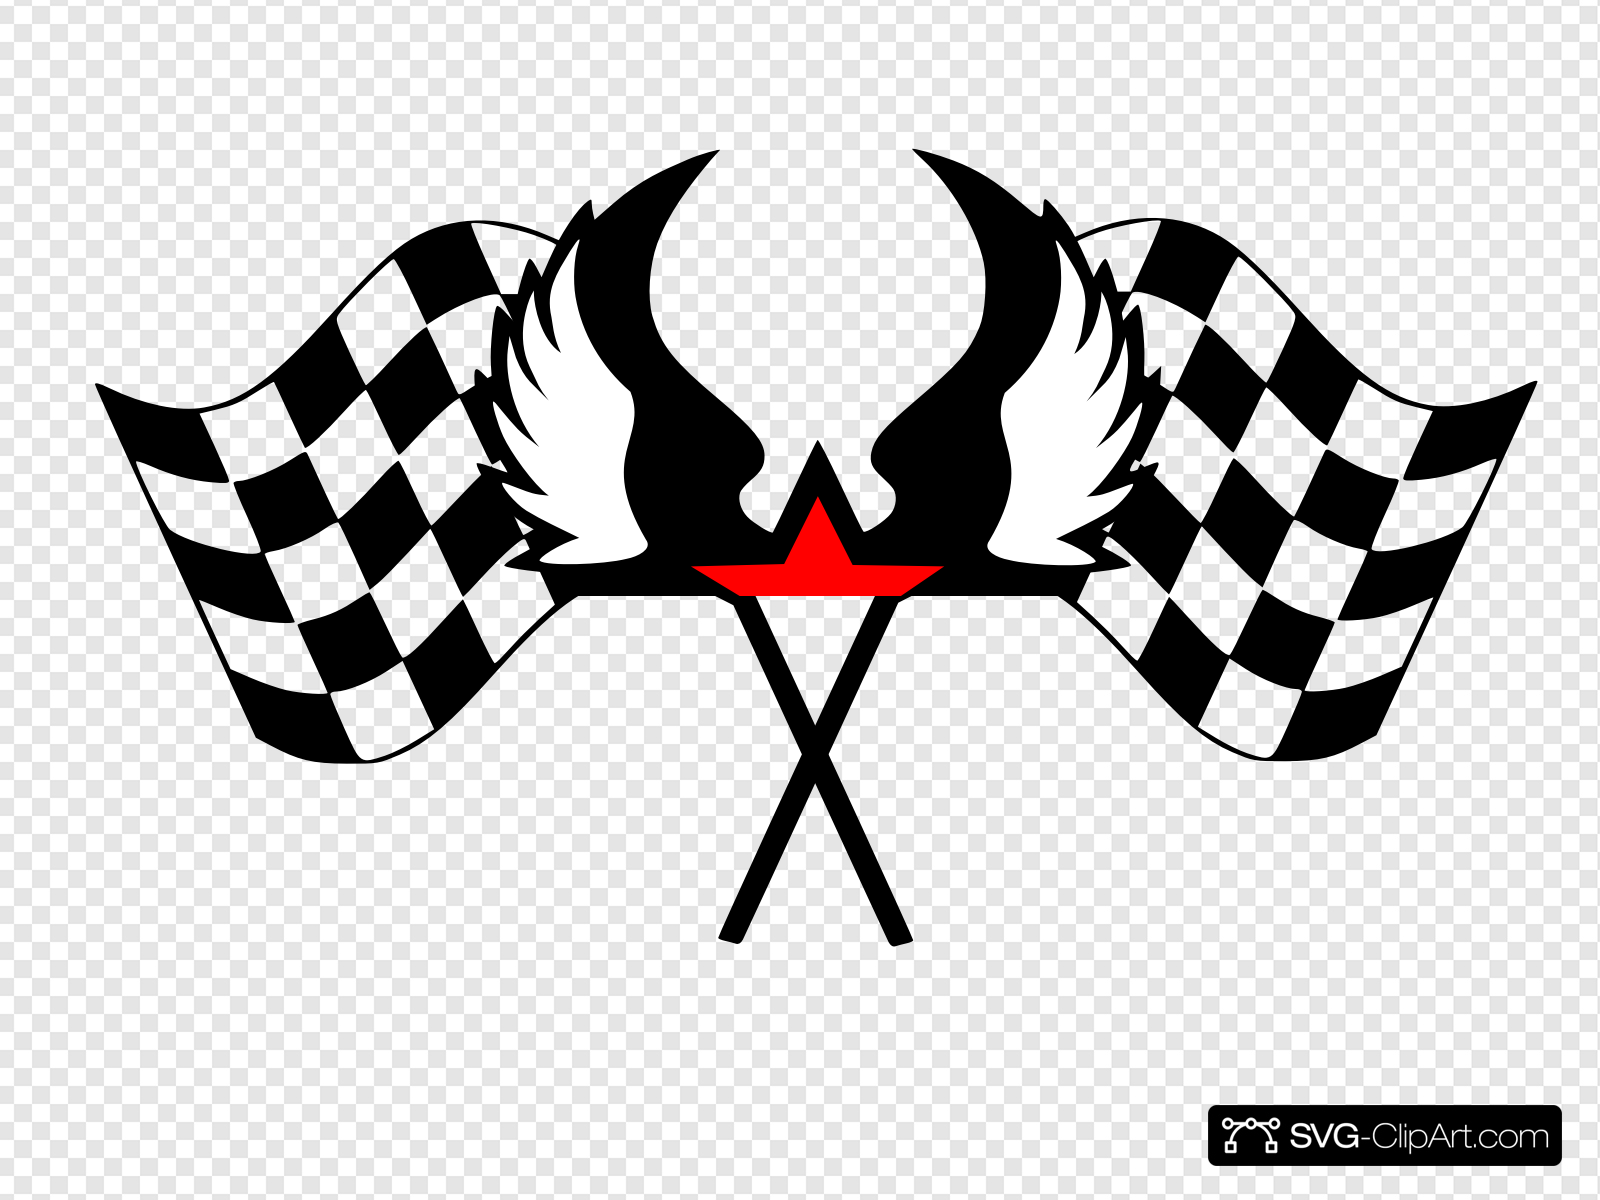 Finish Flags Clip art, Icon and SVG.